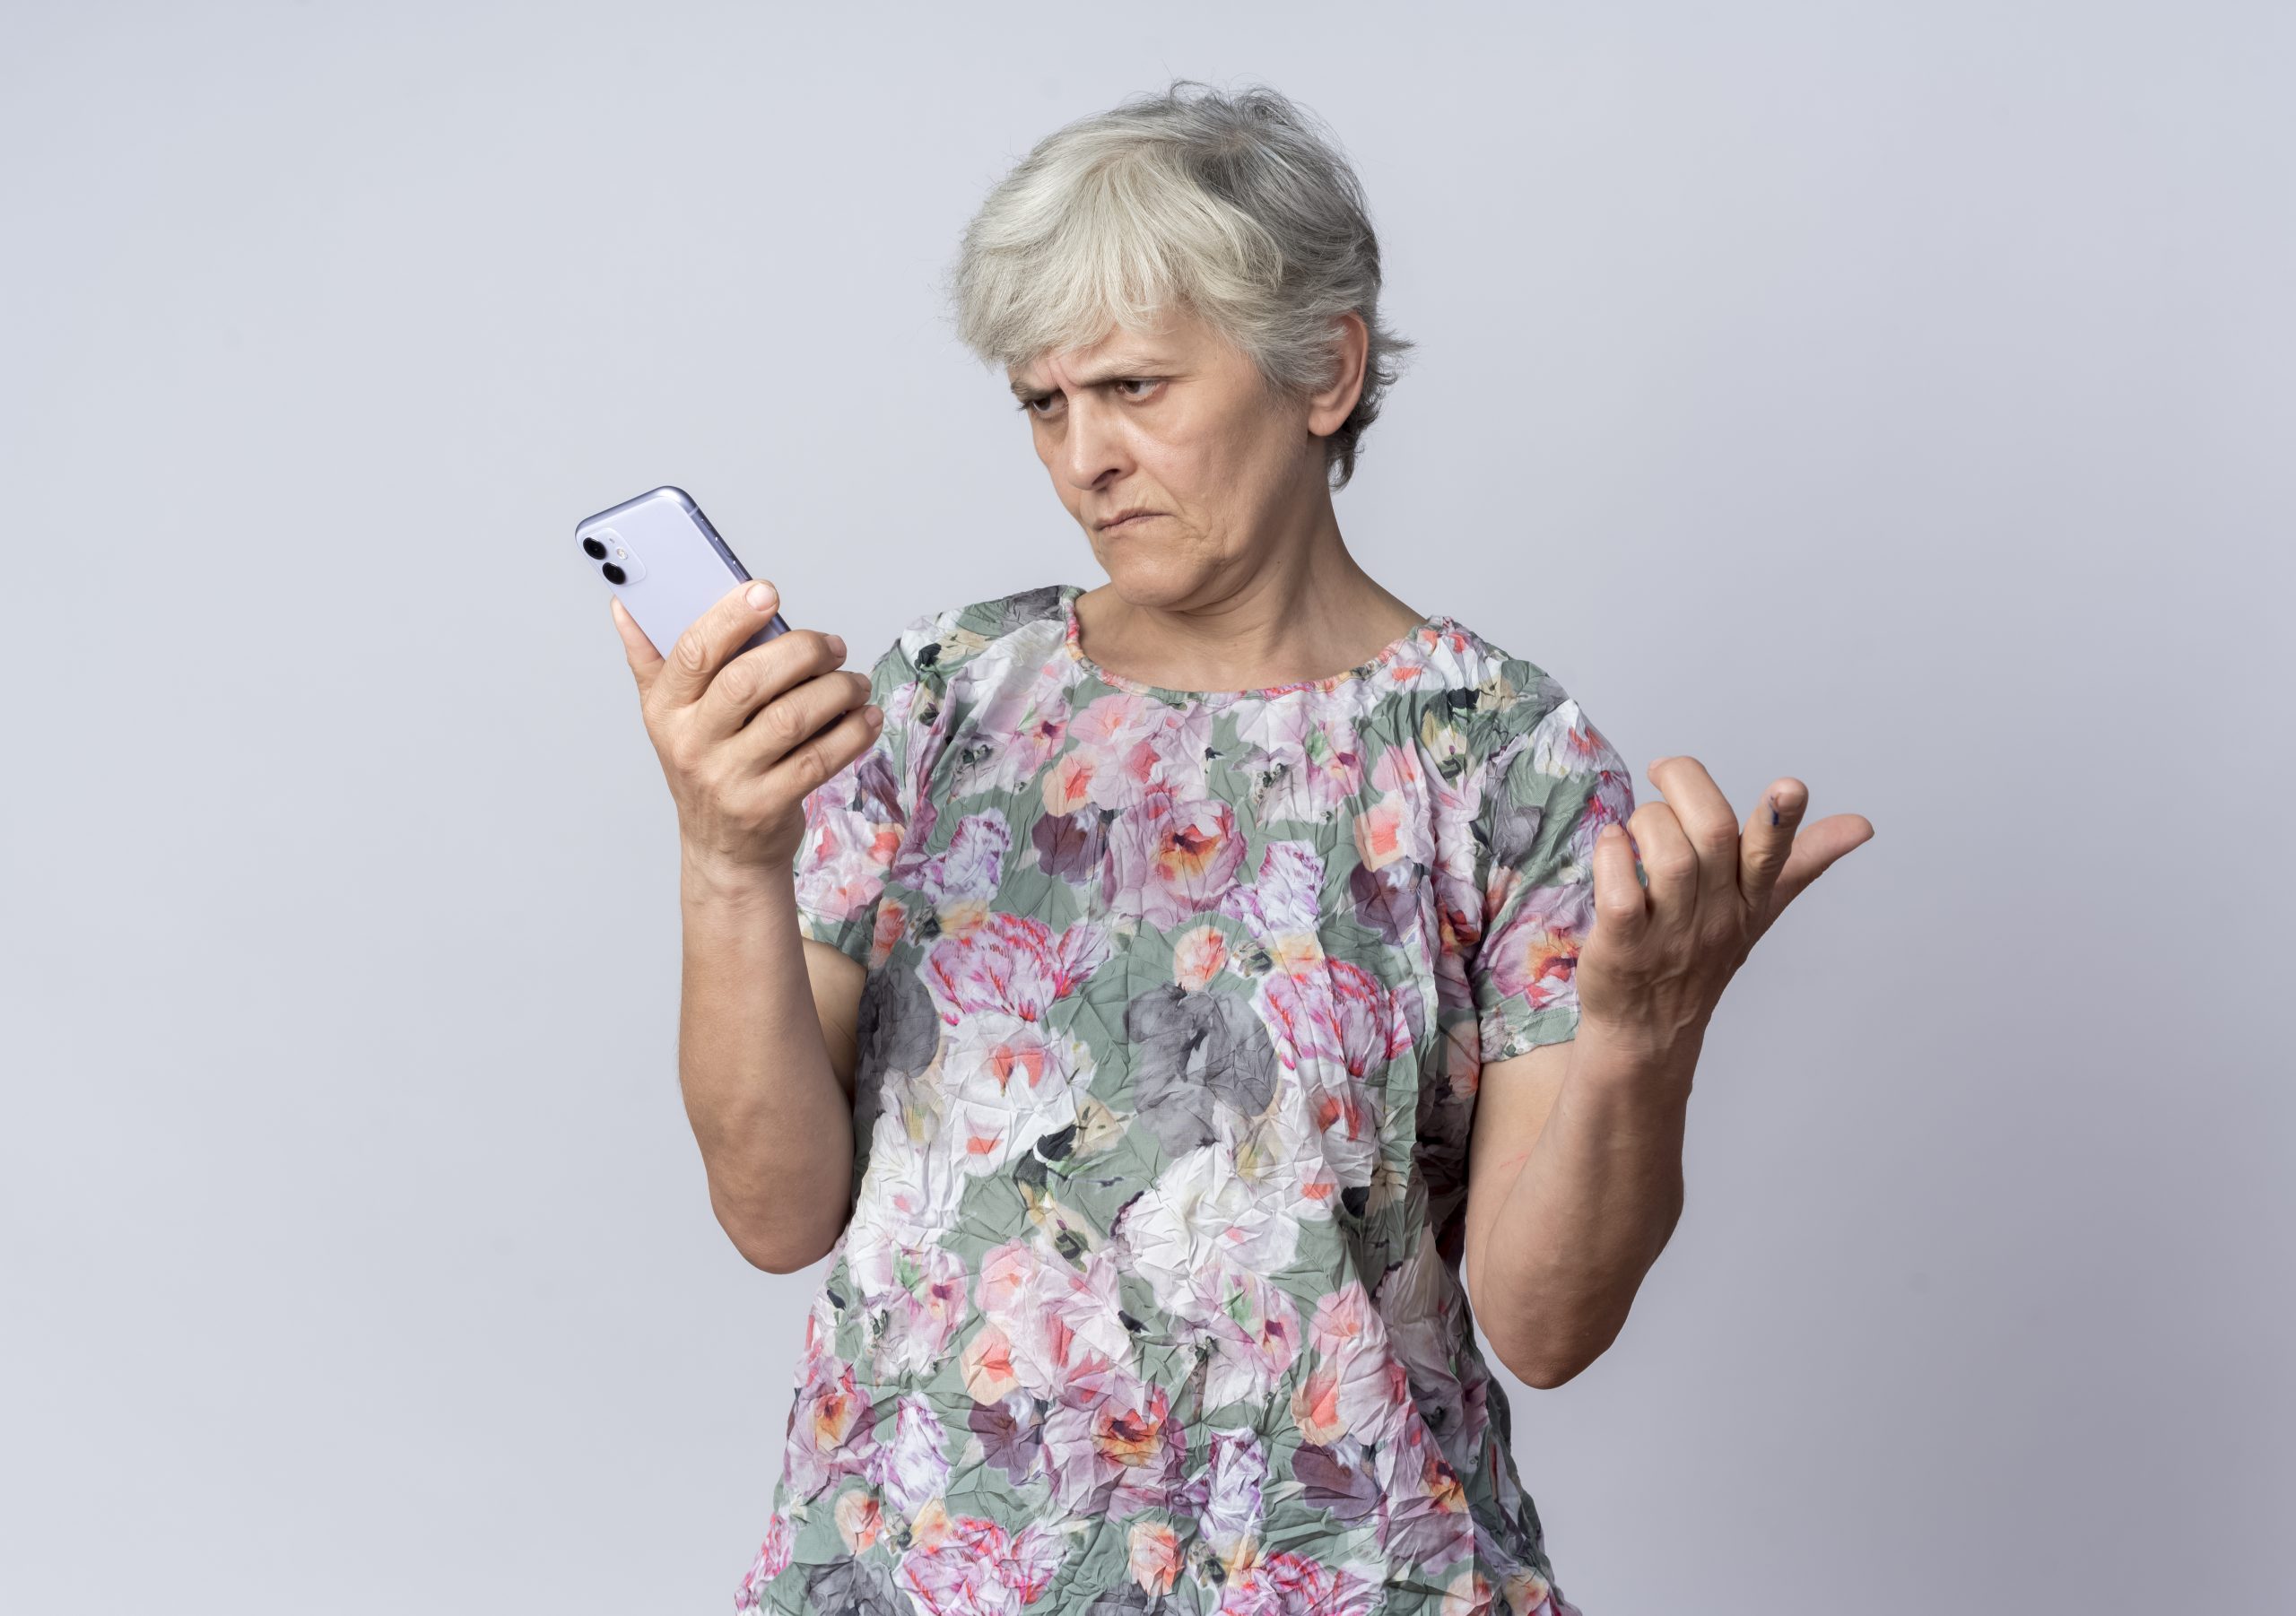 displeased elderly woman holding a phone on white background